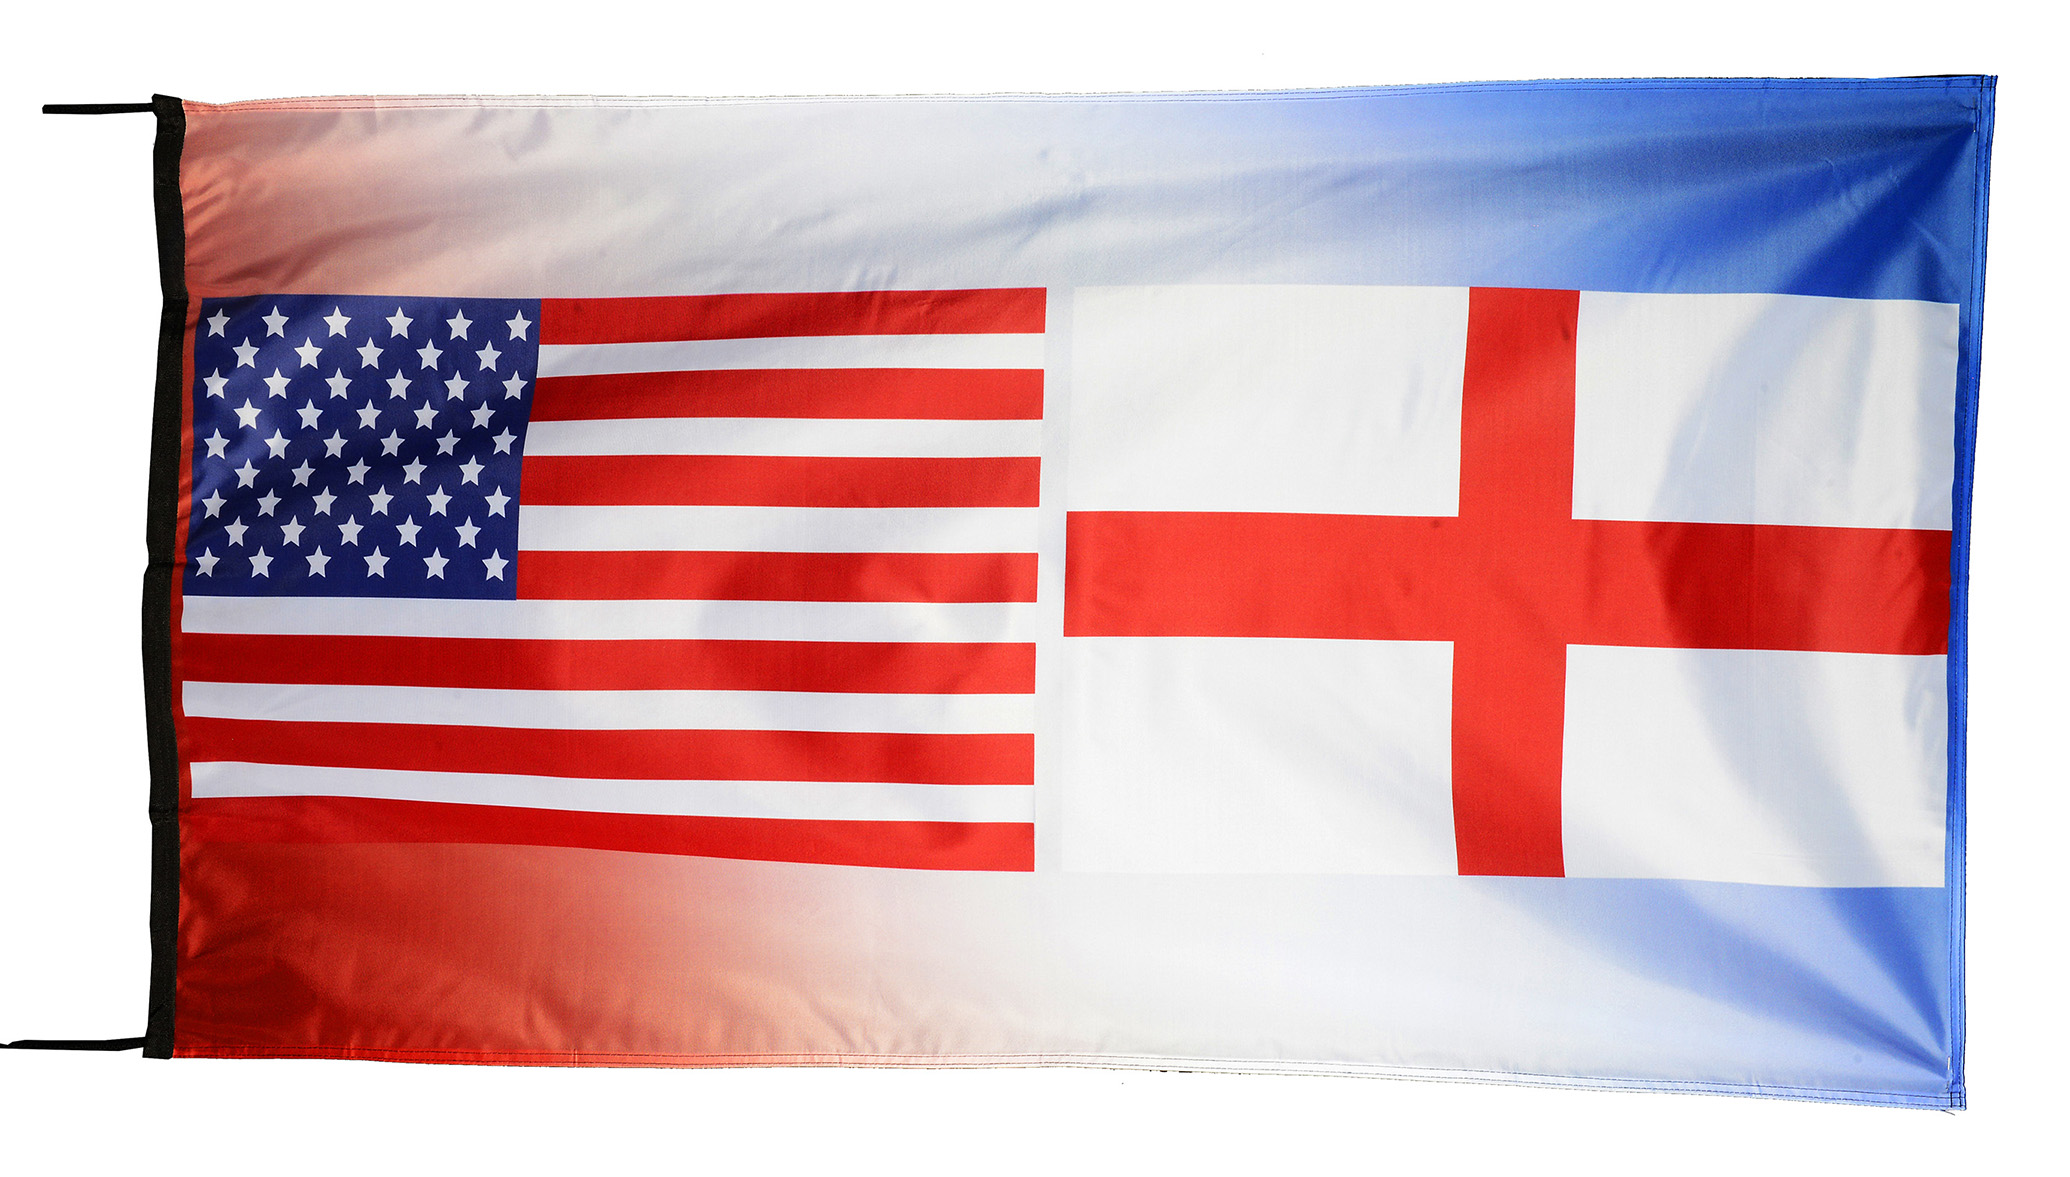 Flag  081 USA / US Country / United States Of America and England / English / United Kingdom / UK / Pride Hybrid Weather-Resistant Polyester Outdoor Flag Landscape Banner / Vivid Colors / 3 X 5 FT (150 x 90cm) International Flags for Sale